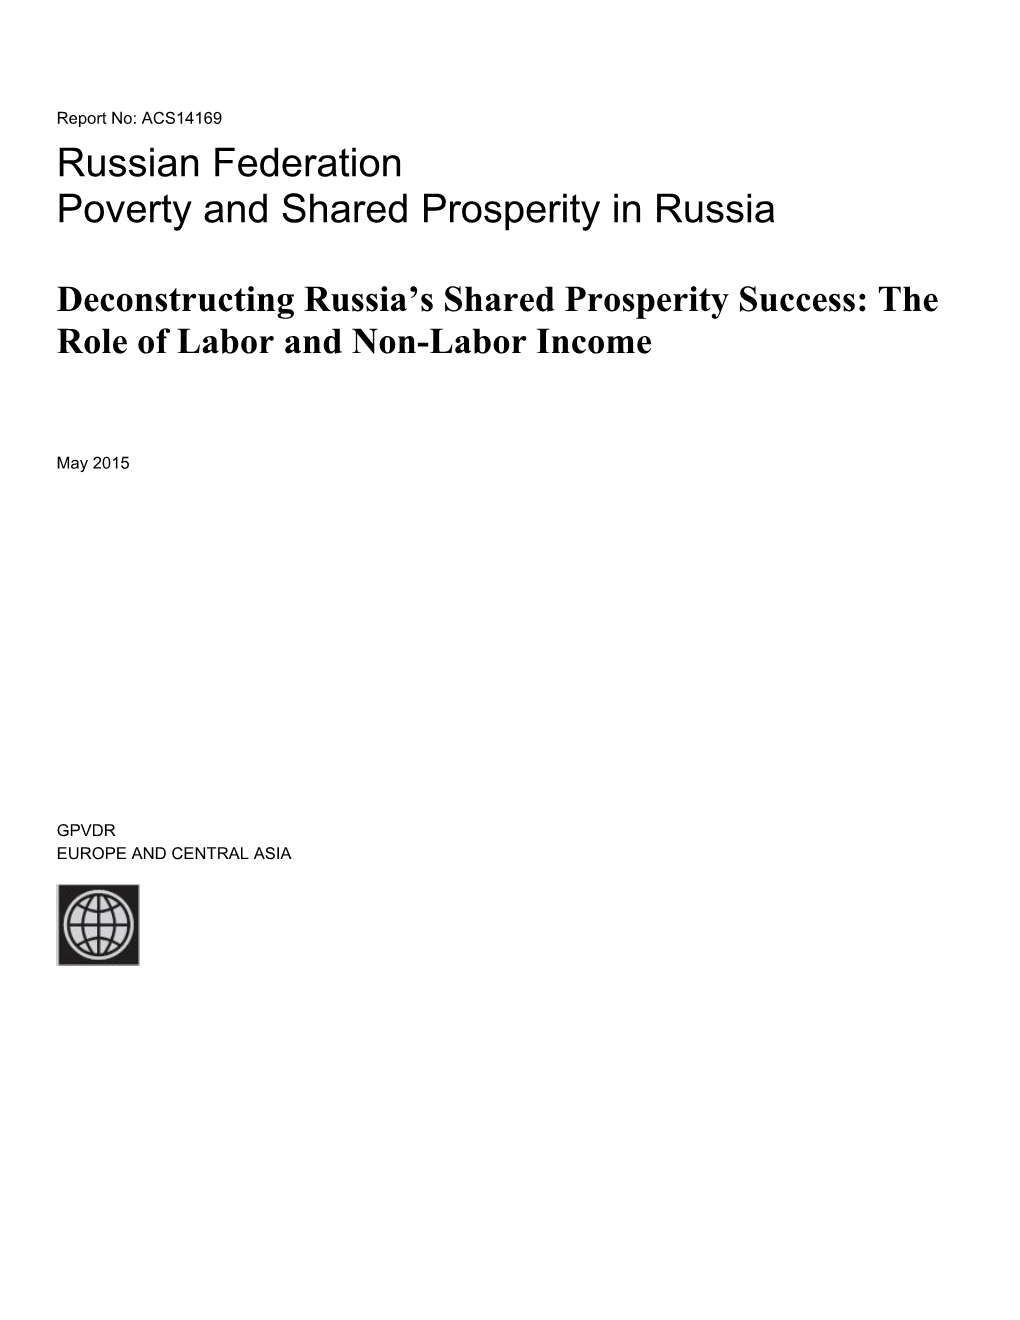 2.Understanding the Drivers of Shared Prosperity in Russia